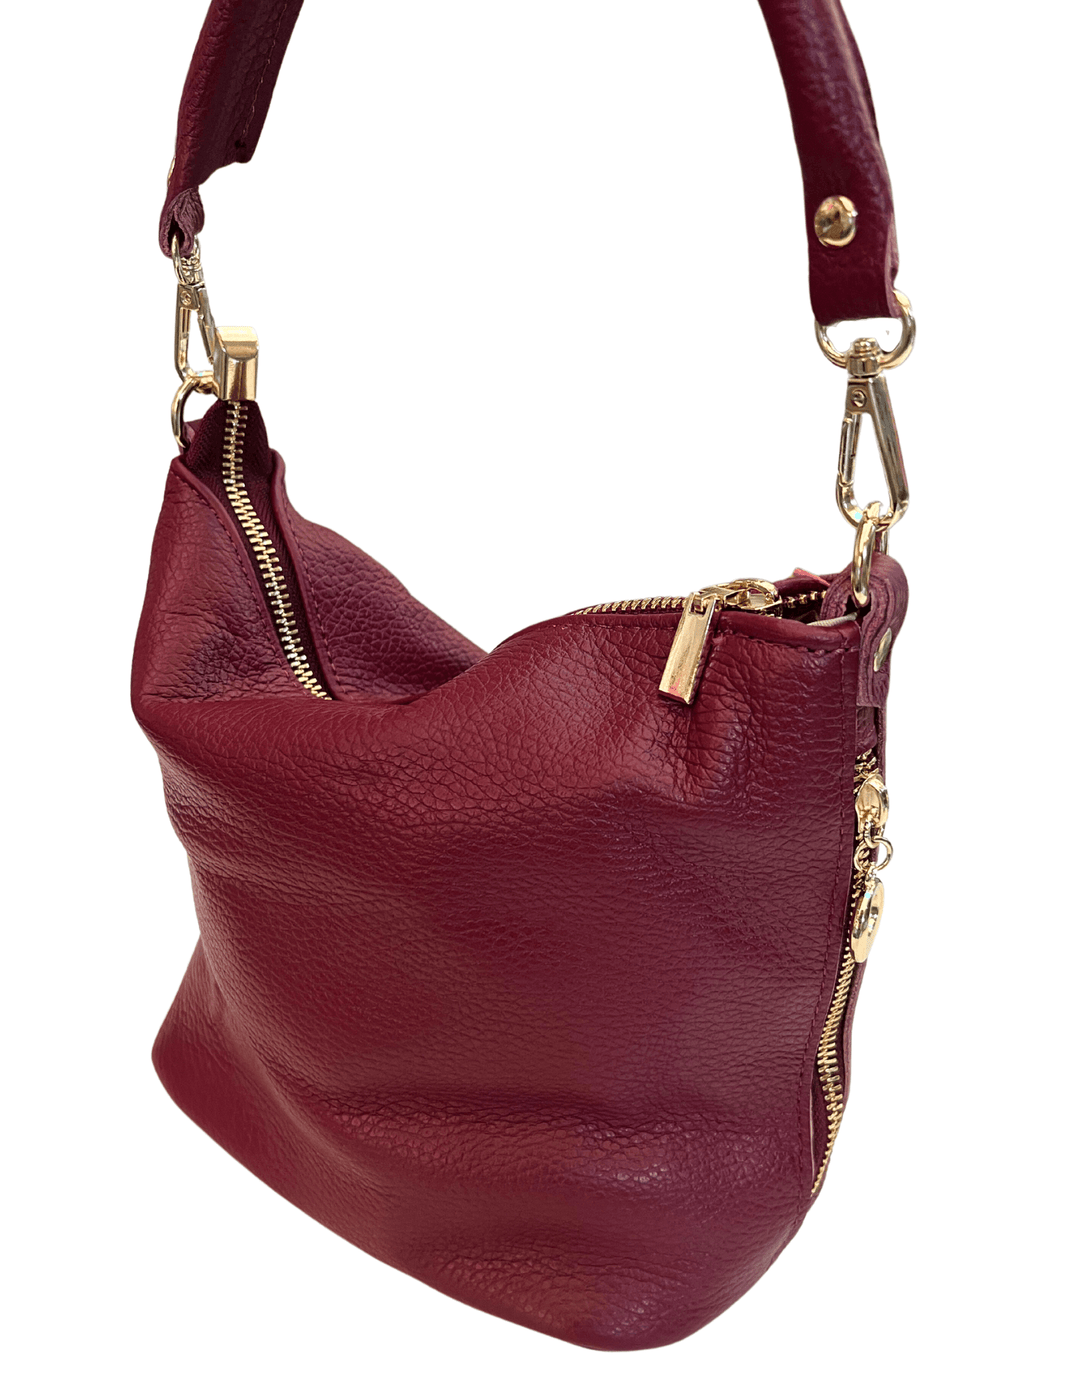 leather bucket bag with crossbody strap tres chic boutique womens gift idea deep red